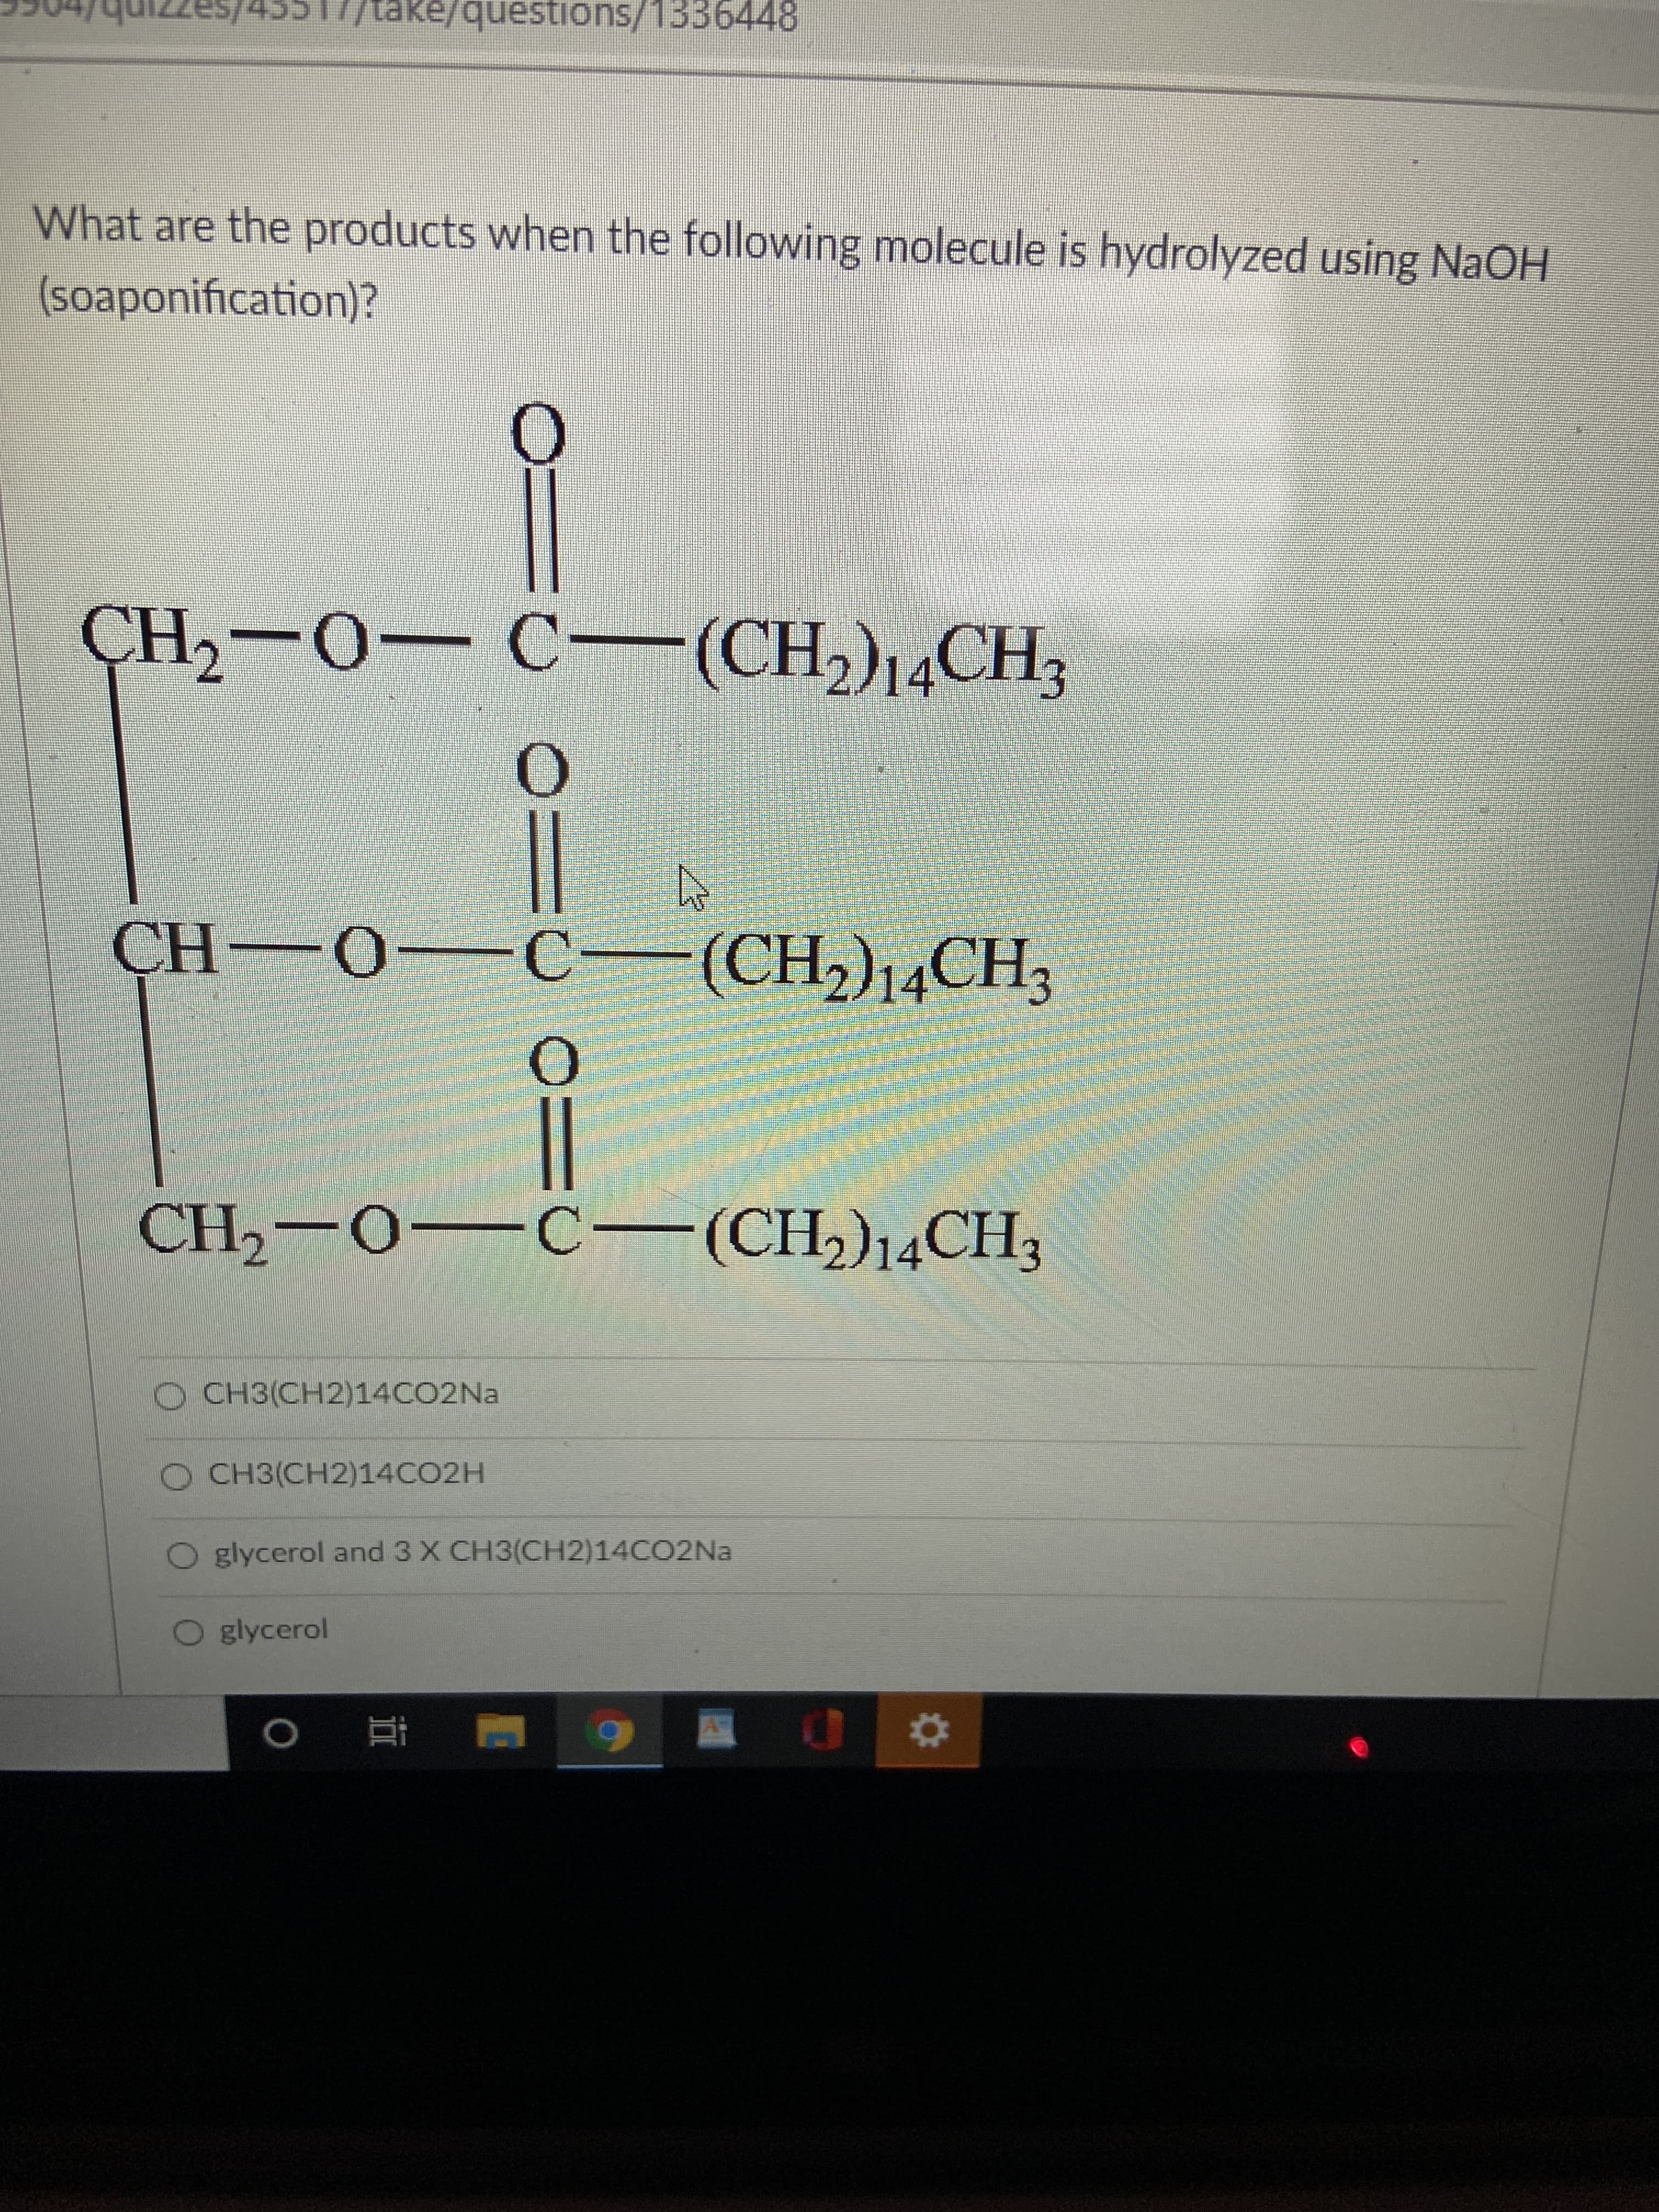 What are the products when the following molecule is hydrolyzed using NaOH
(soaponification)?
